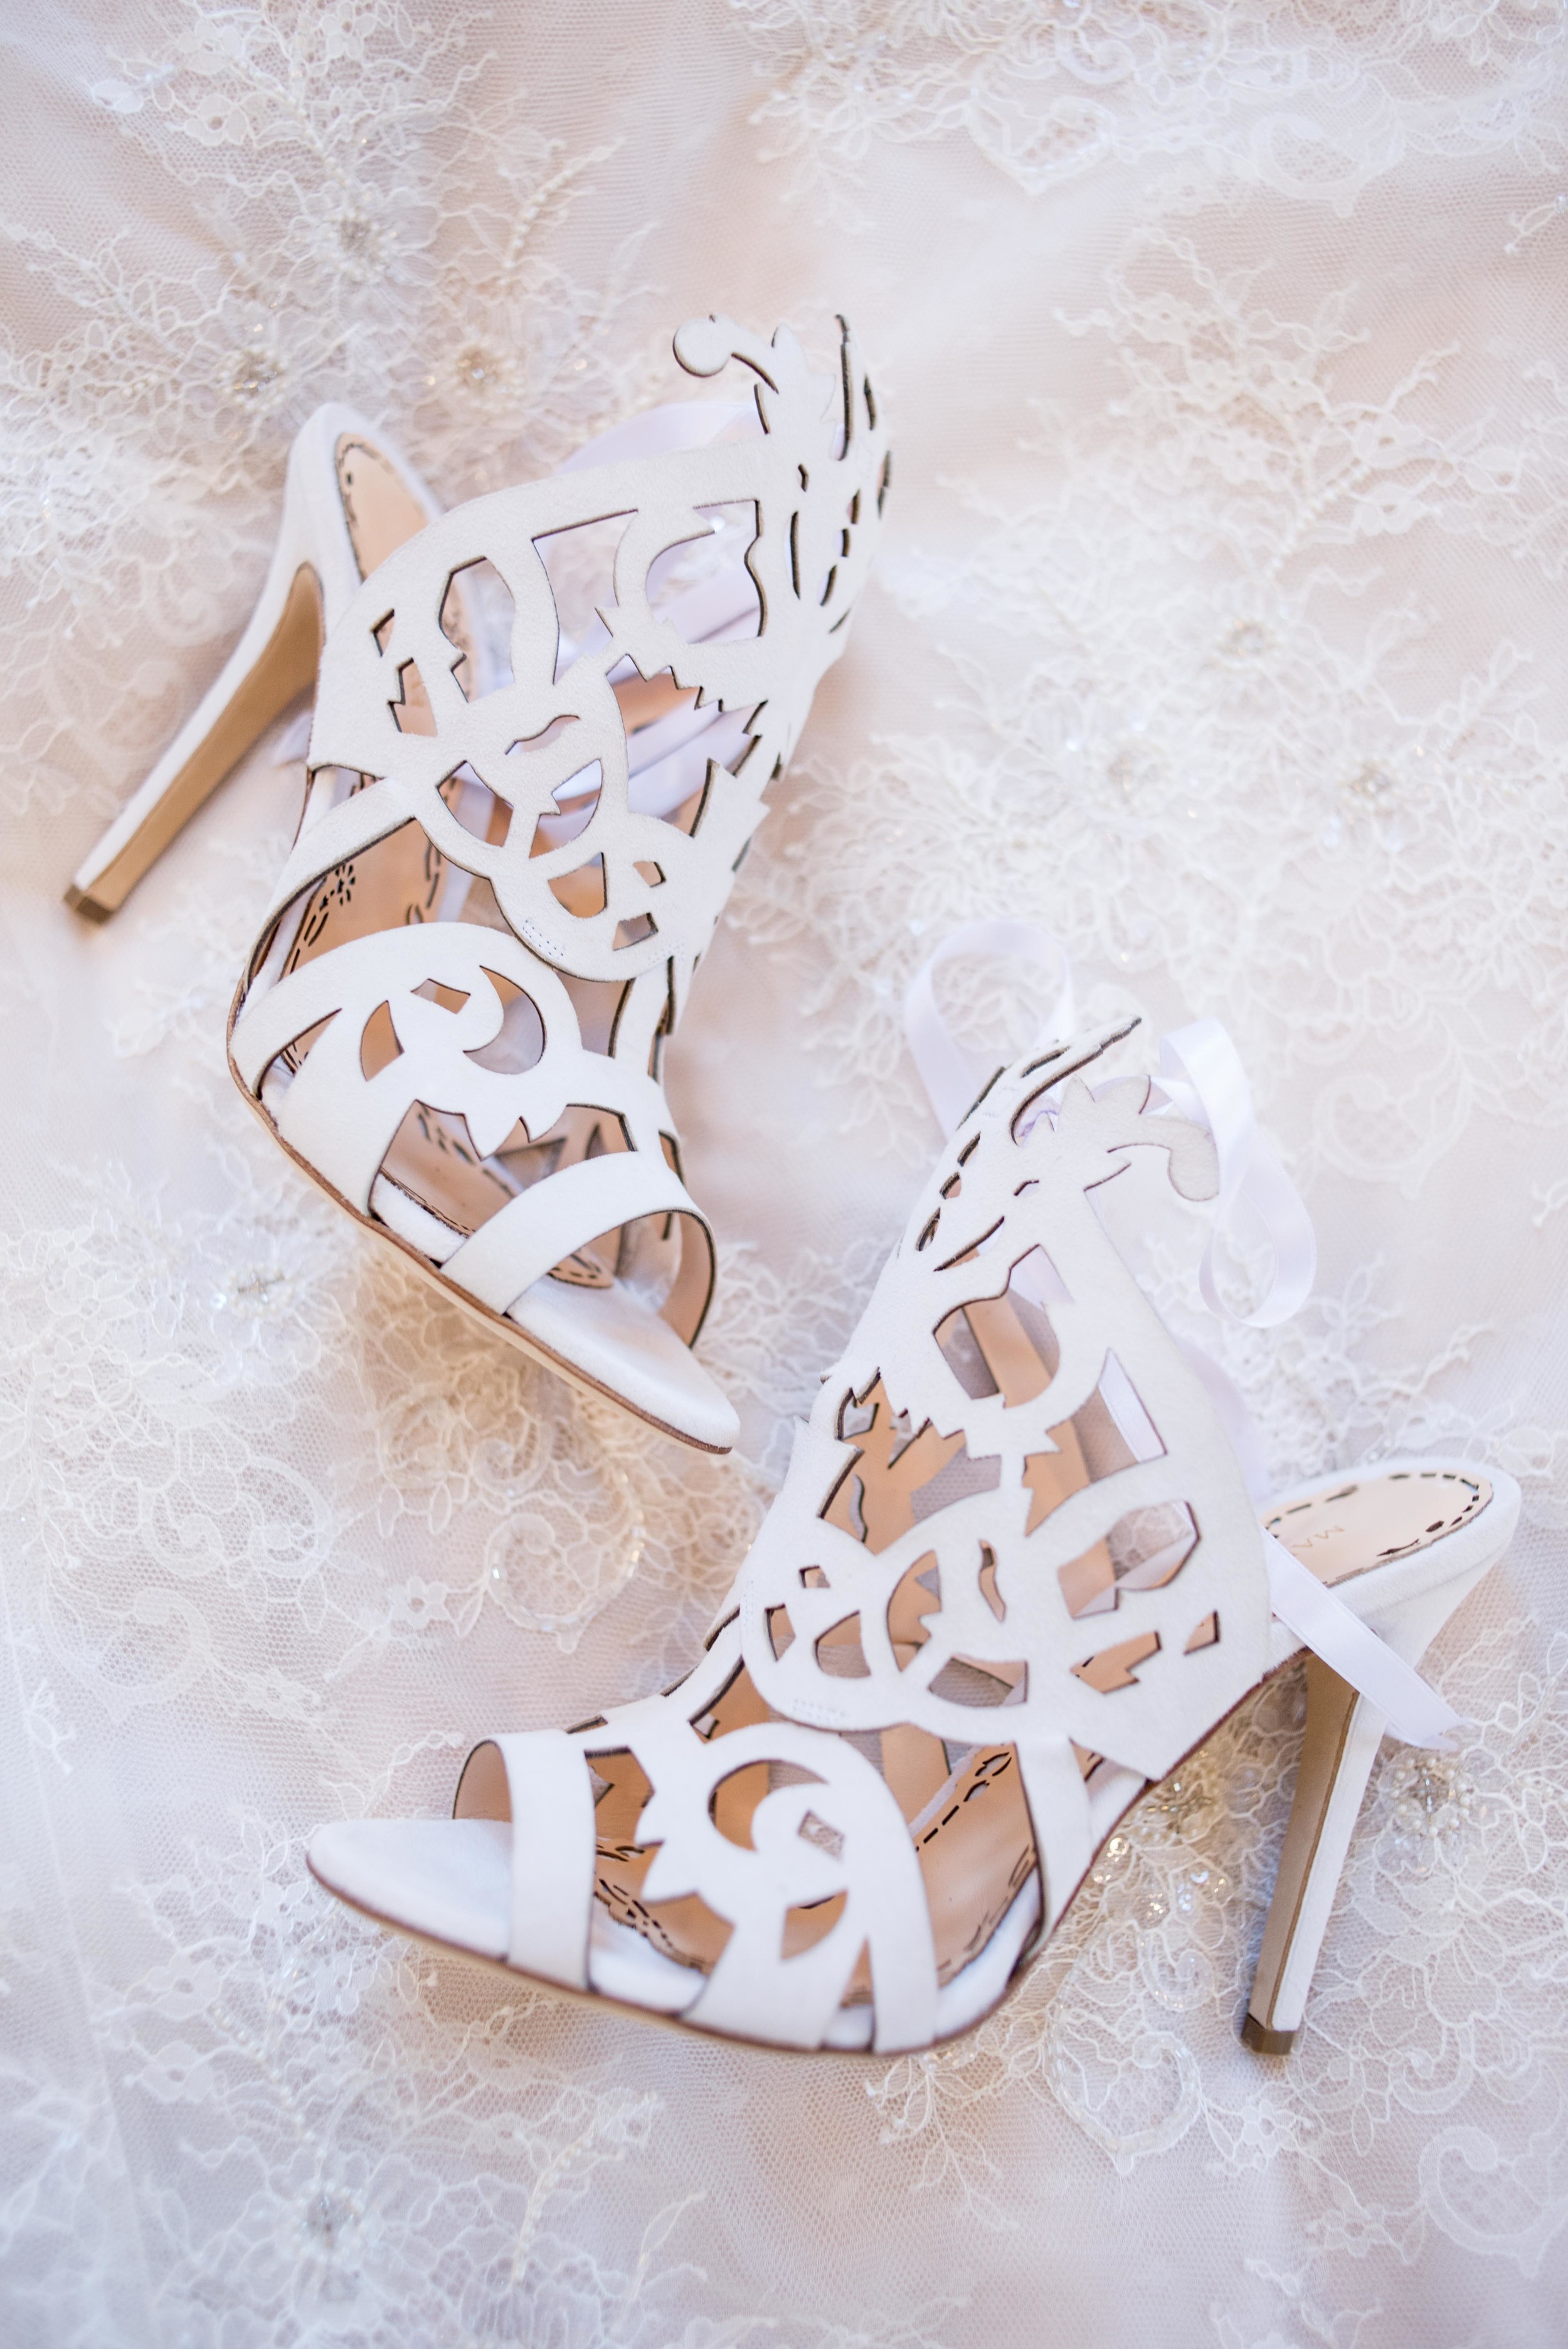  Marchesa shoes - Jessica | available in Colorado only at Little White Dress Bridal Shop, Denver 